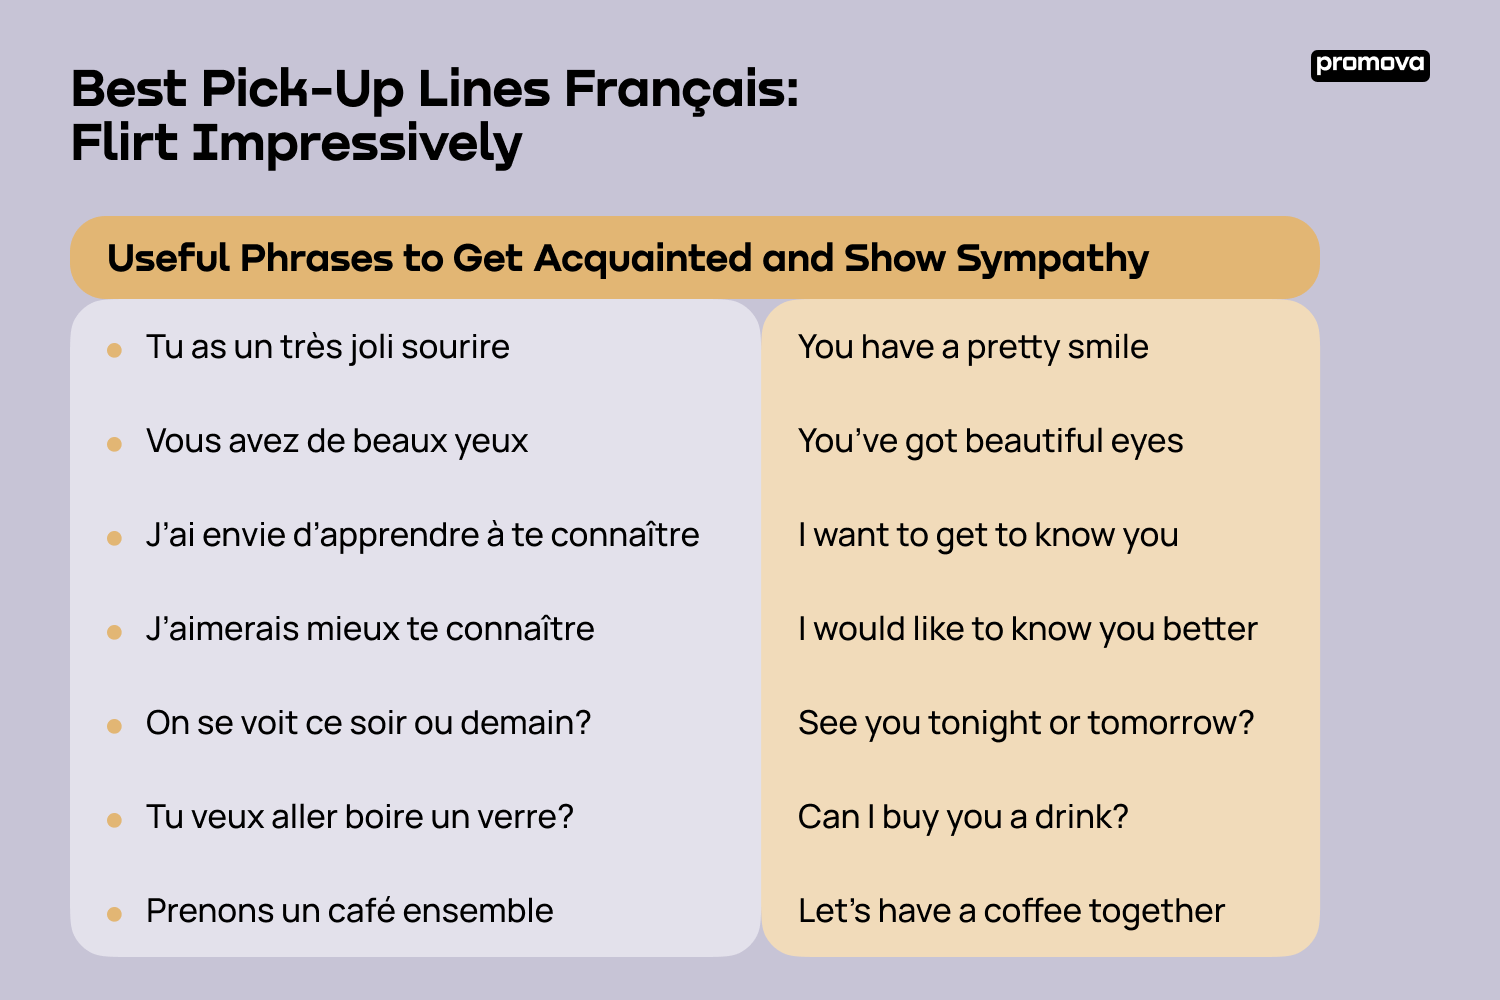 Useful Phrases to Get Acquainted and Show Sympathy